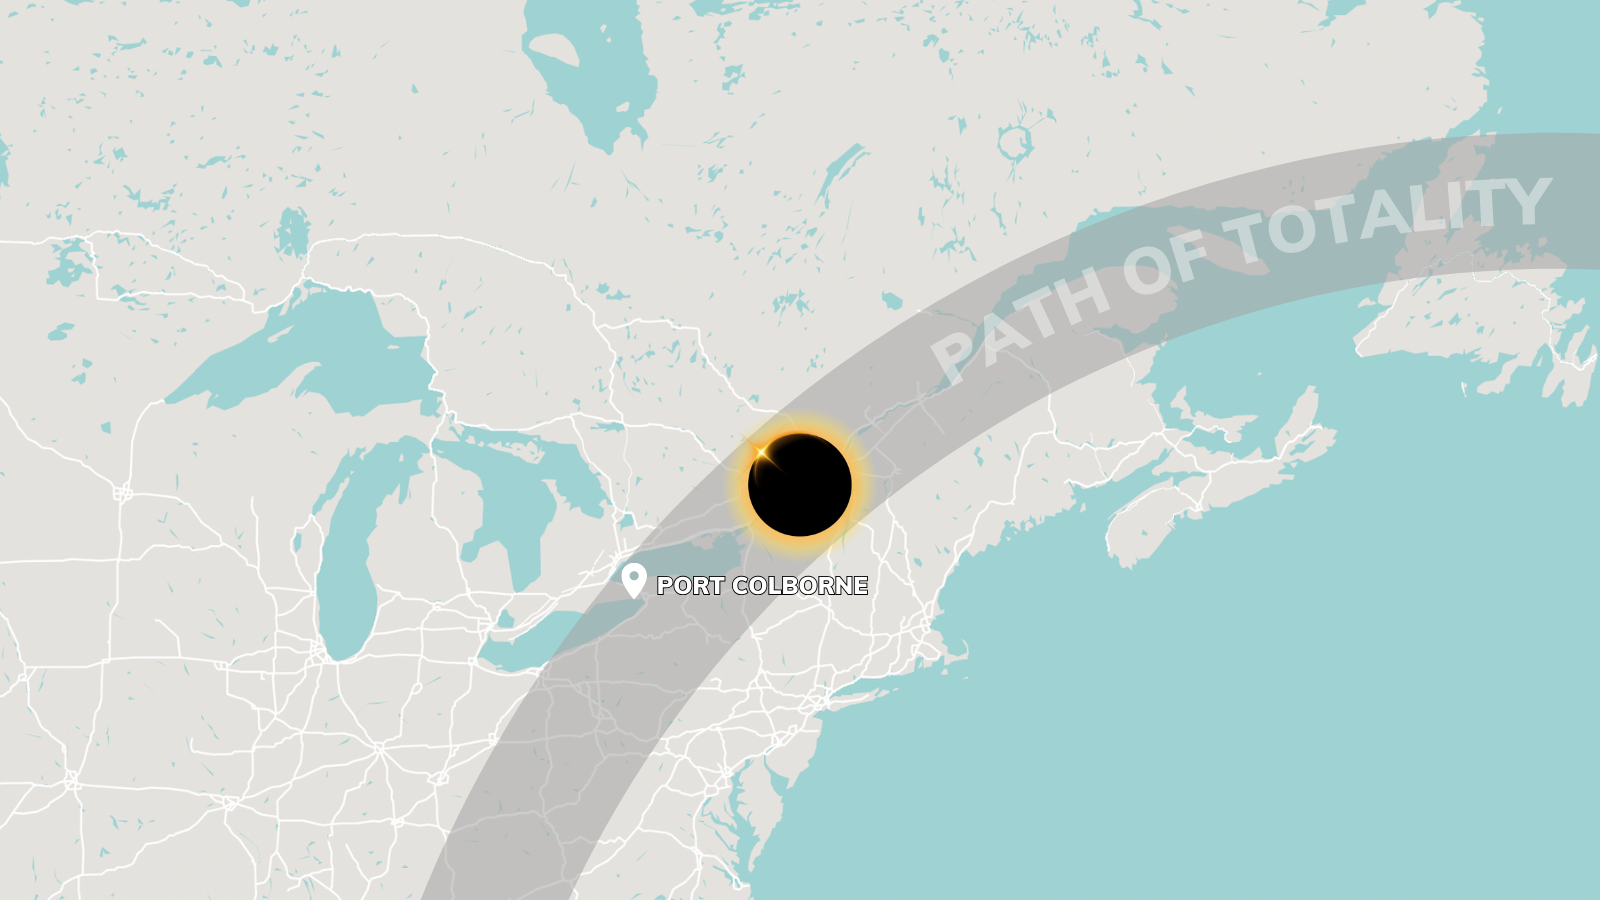 PORT COLBORNE - PATH OF TOTALITY.png